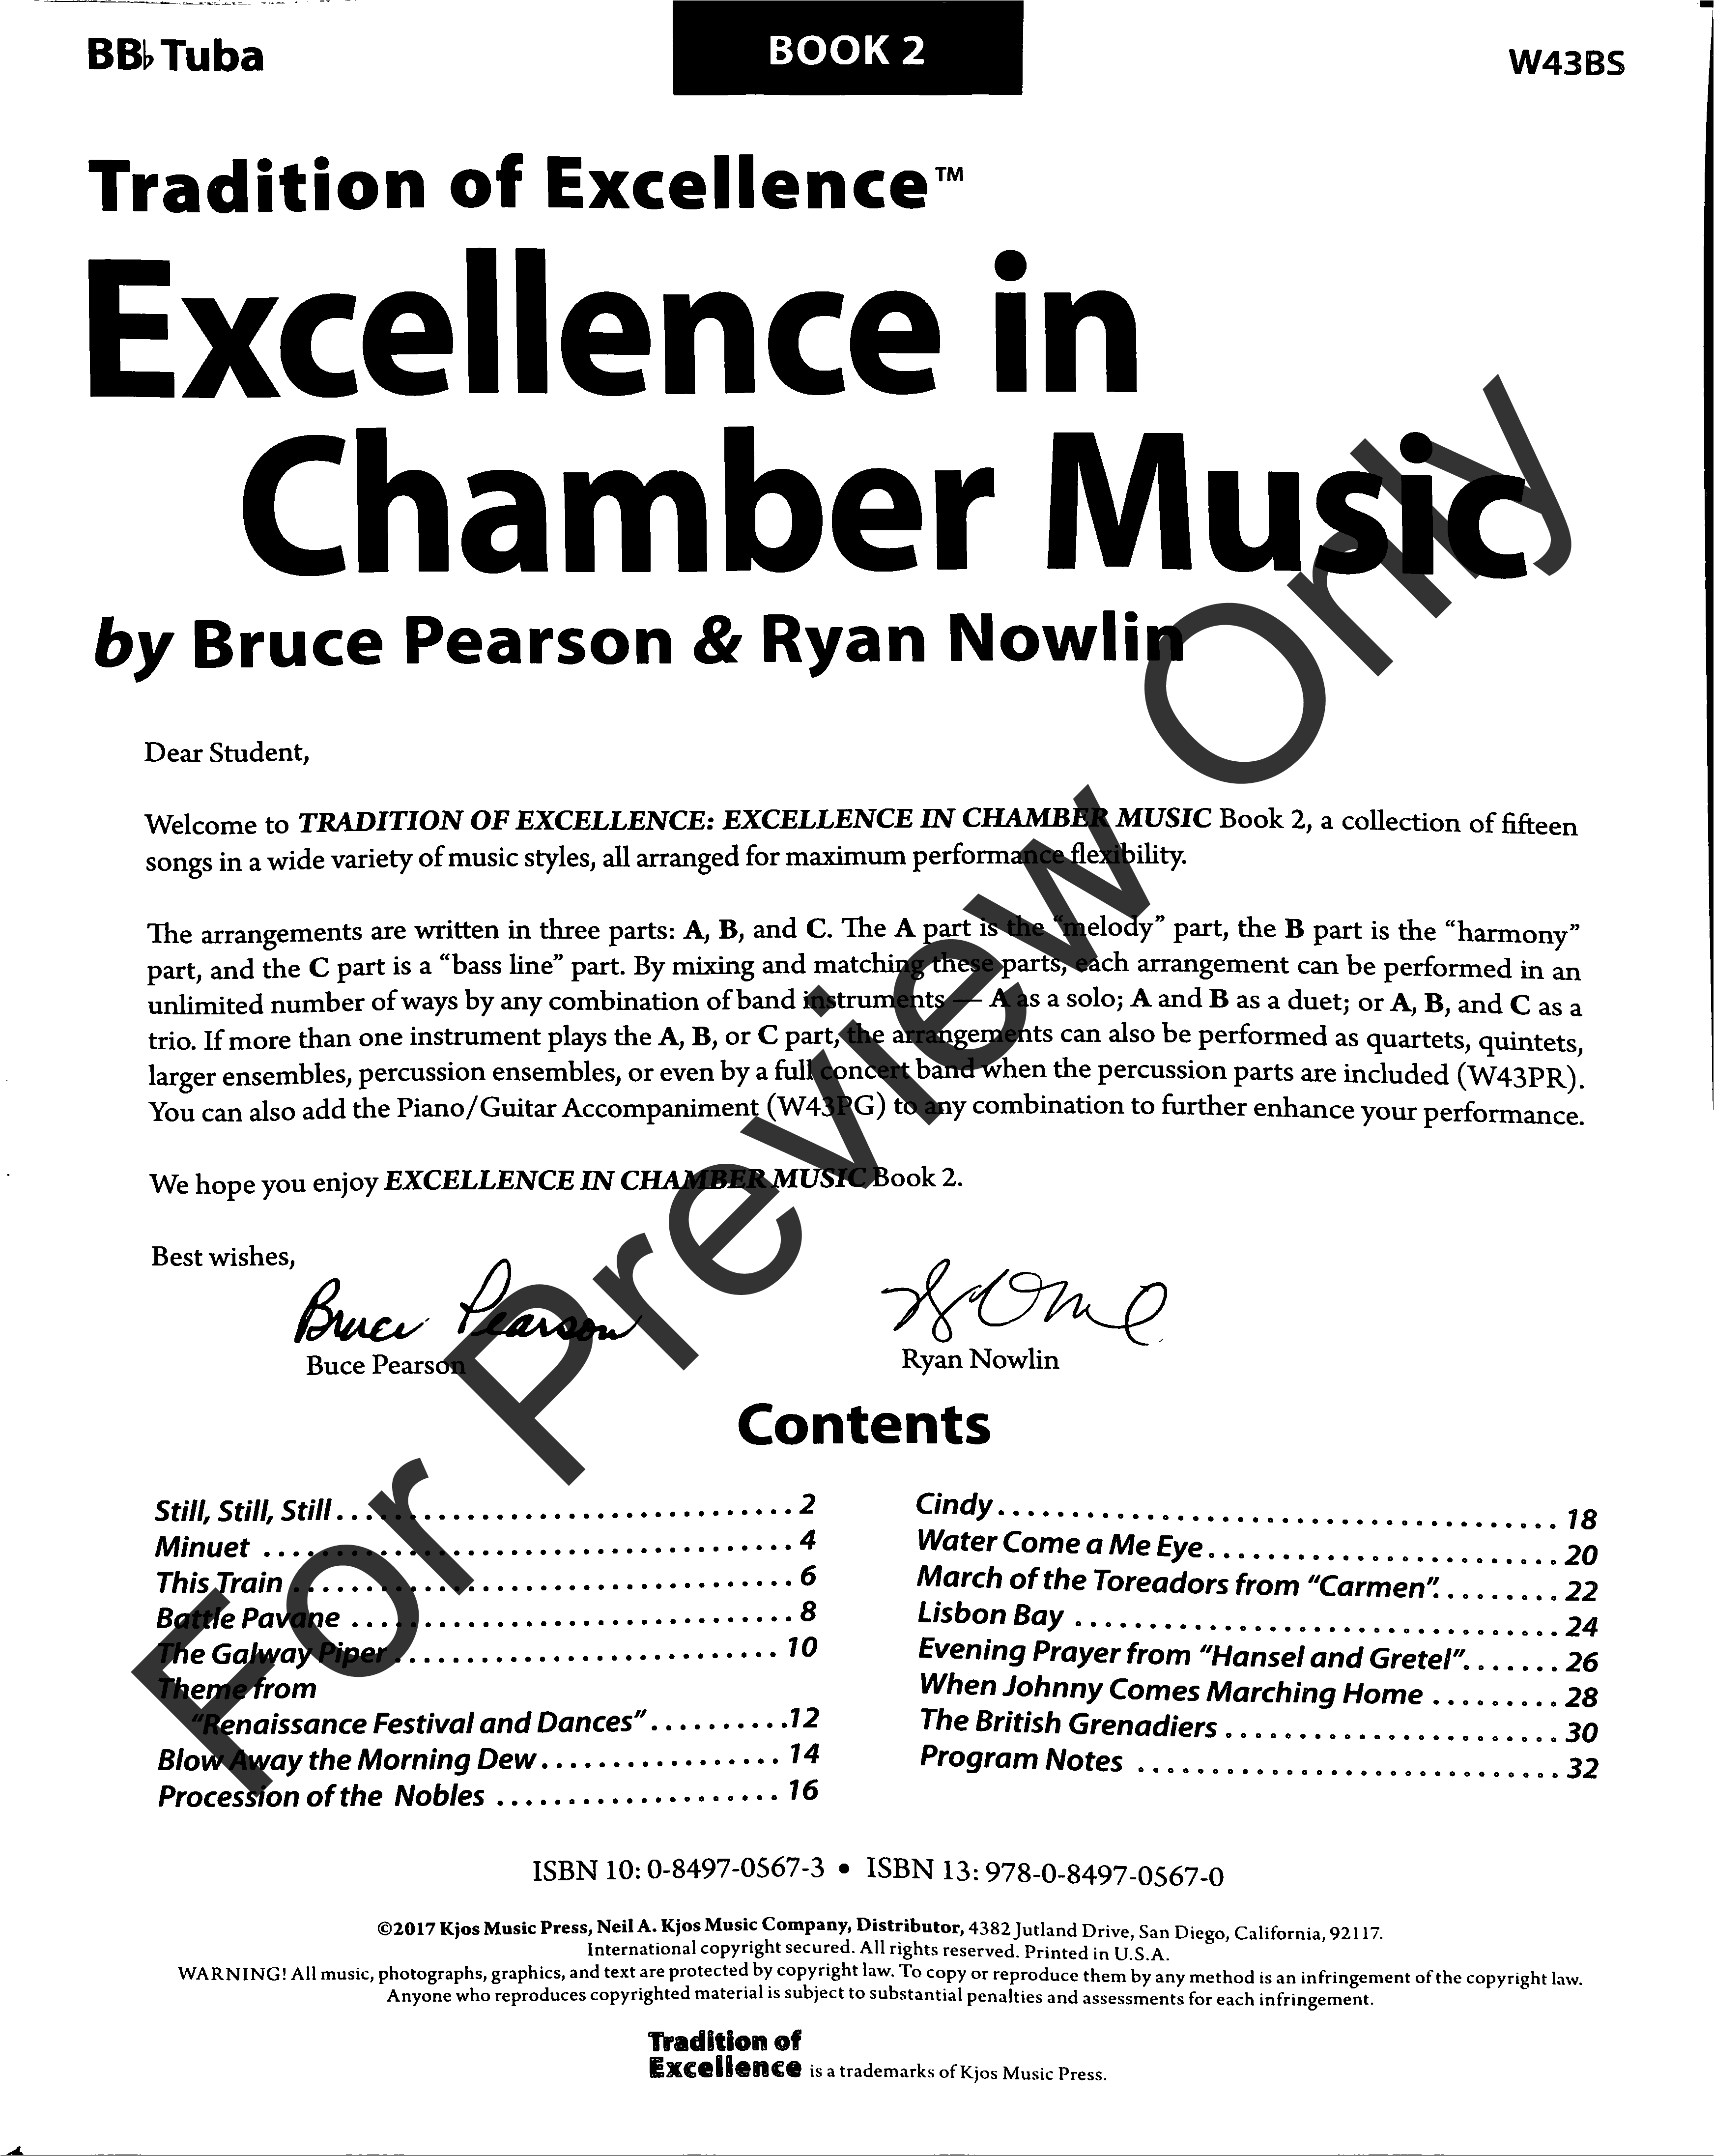 Excellence in Chamber Music #2 BBb Tuba Book